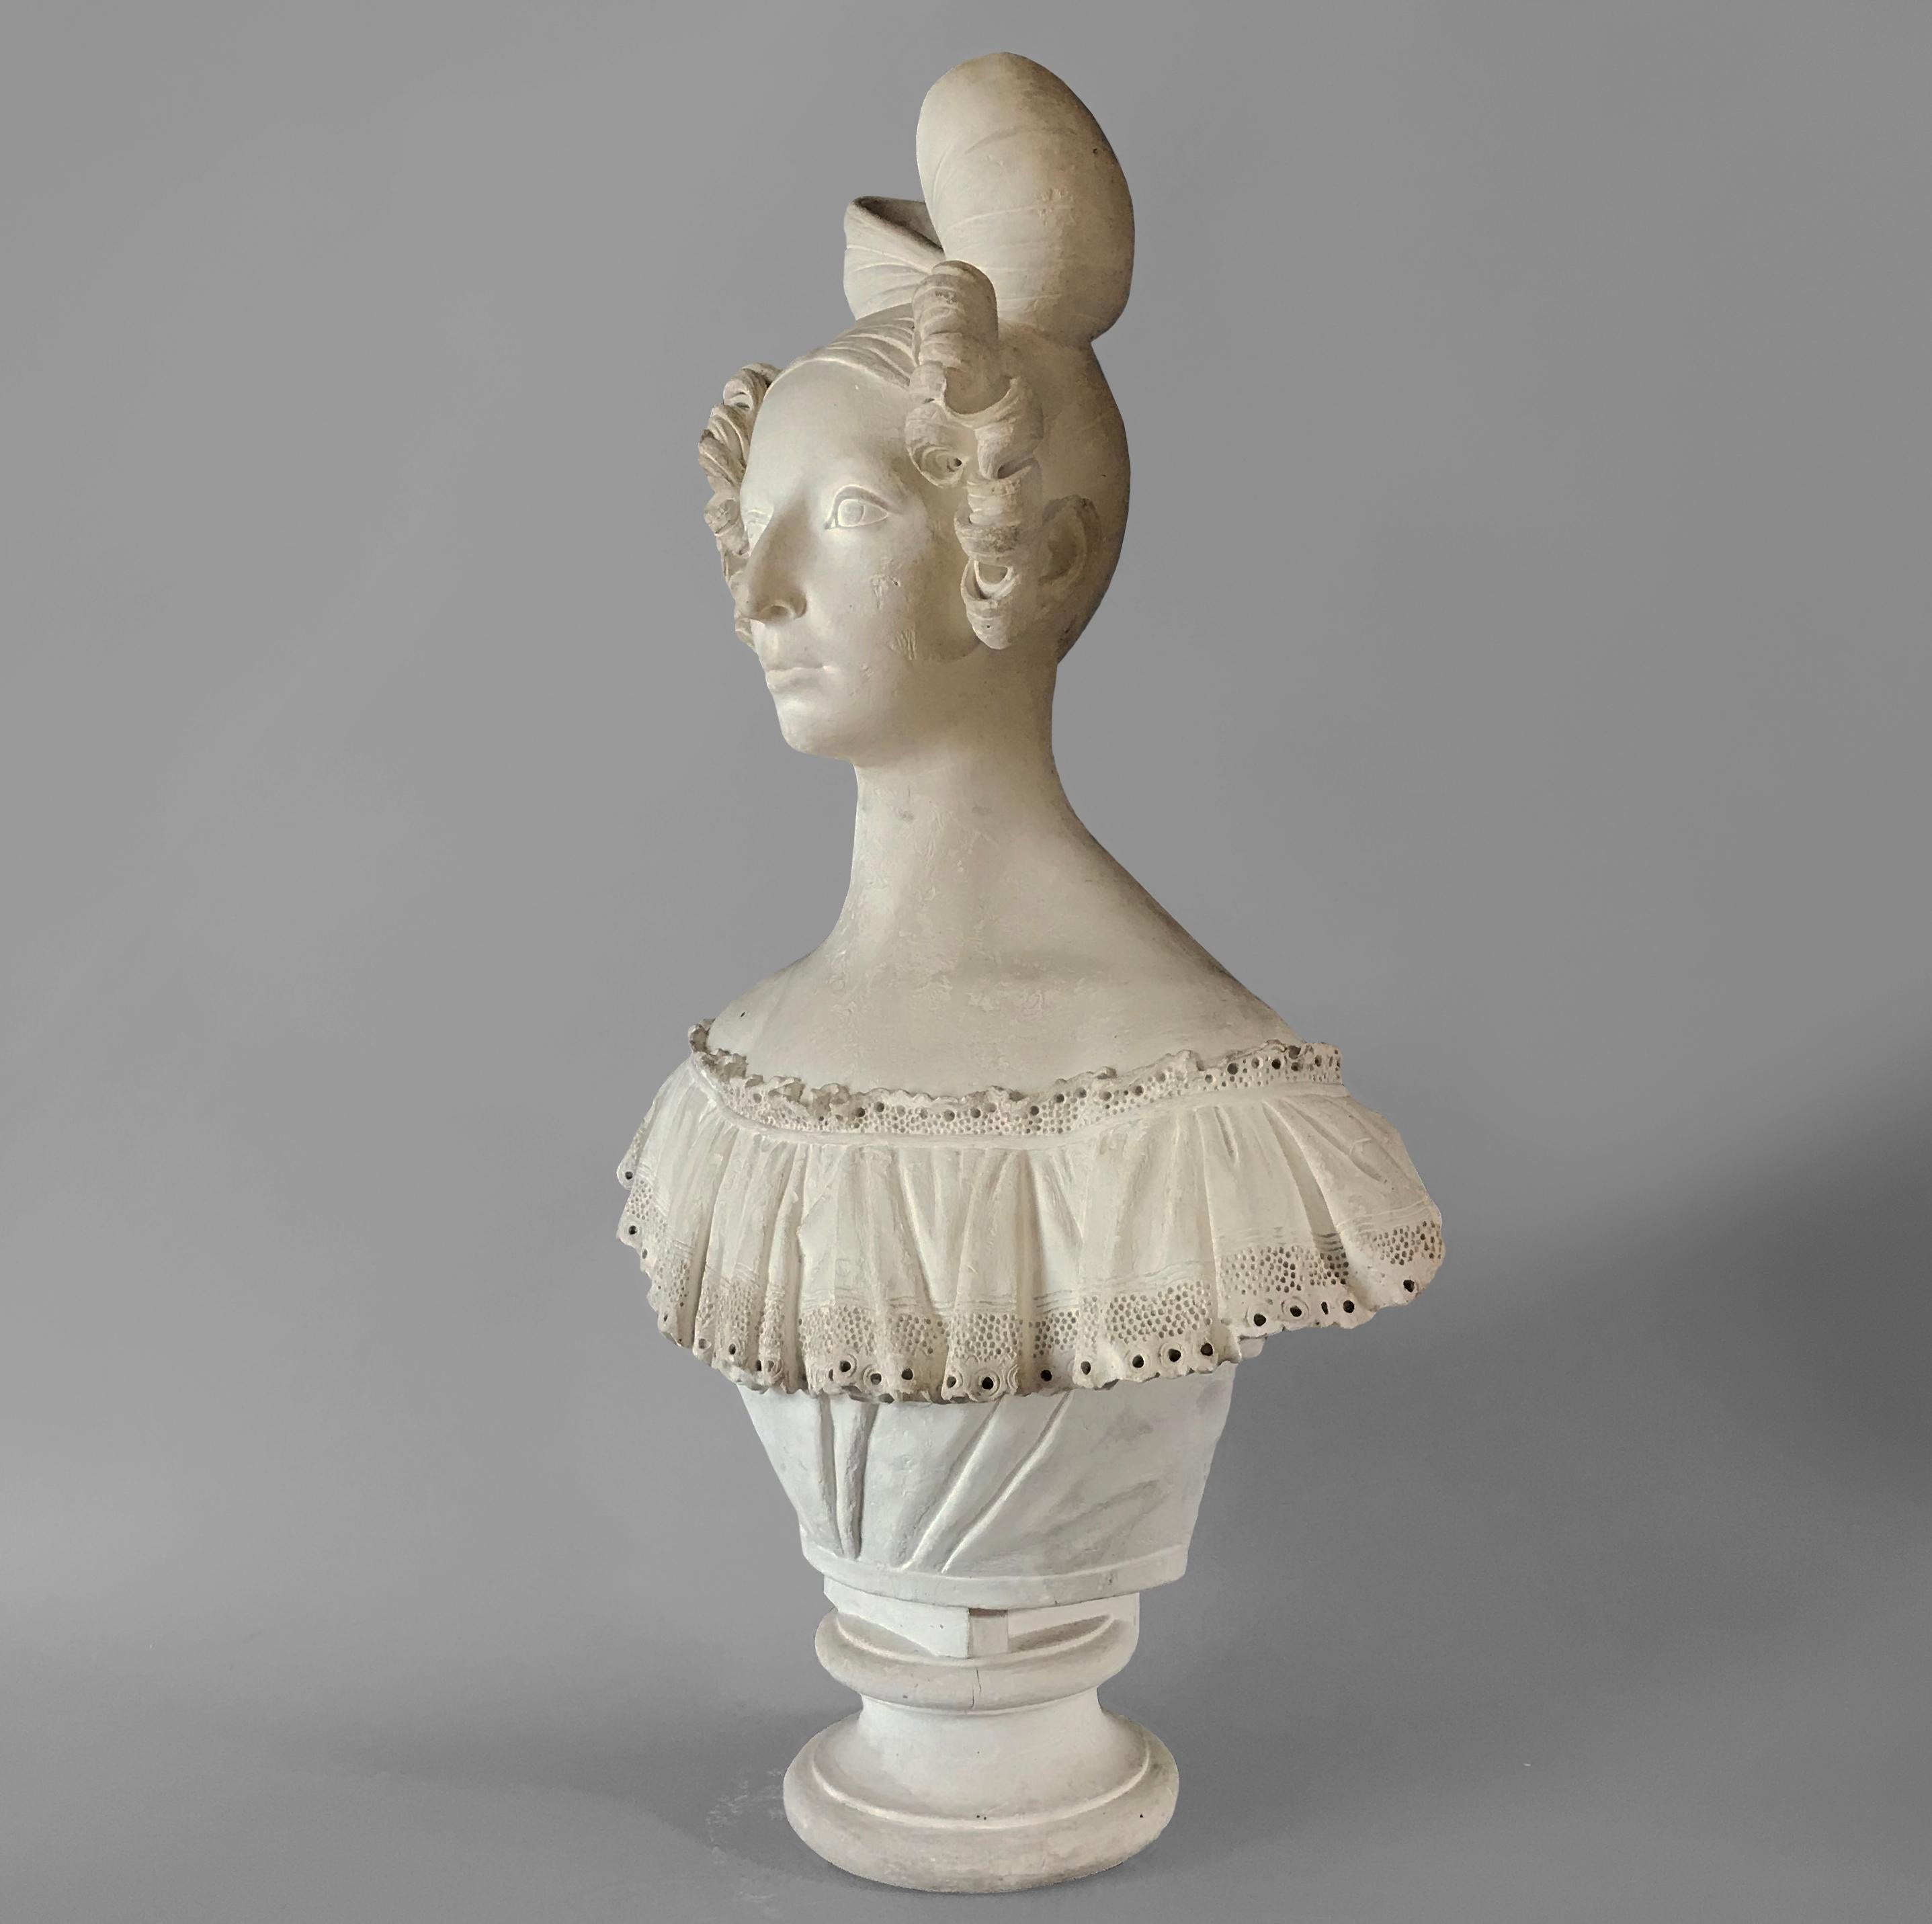 A wonderfully modelled bust of a French lady showing off her amazing coiffeured hair of curls with a large bow, wearing a gathered intricate lace top and sitting on a deeply waisted socle.